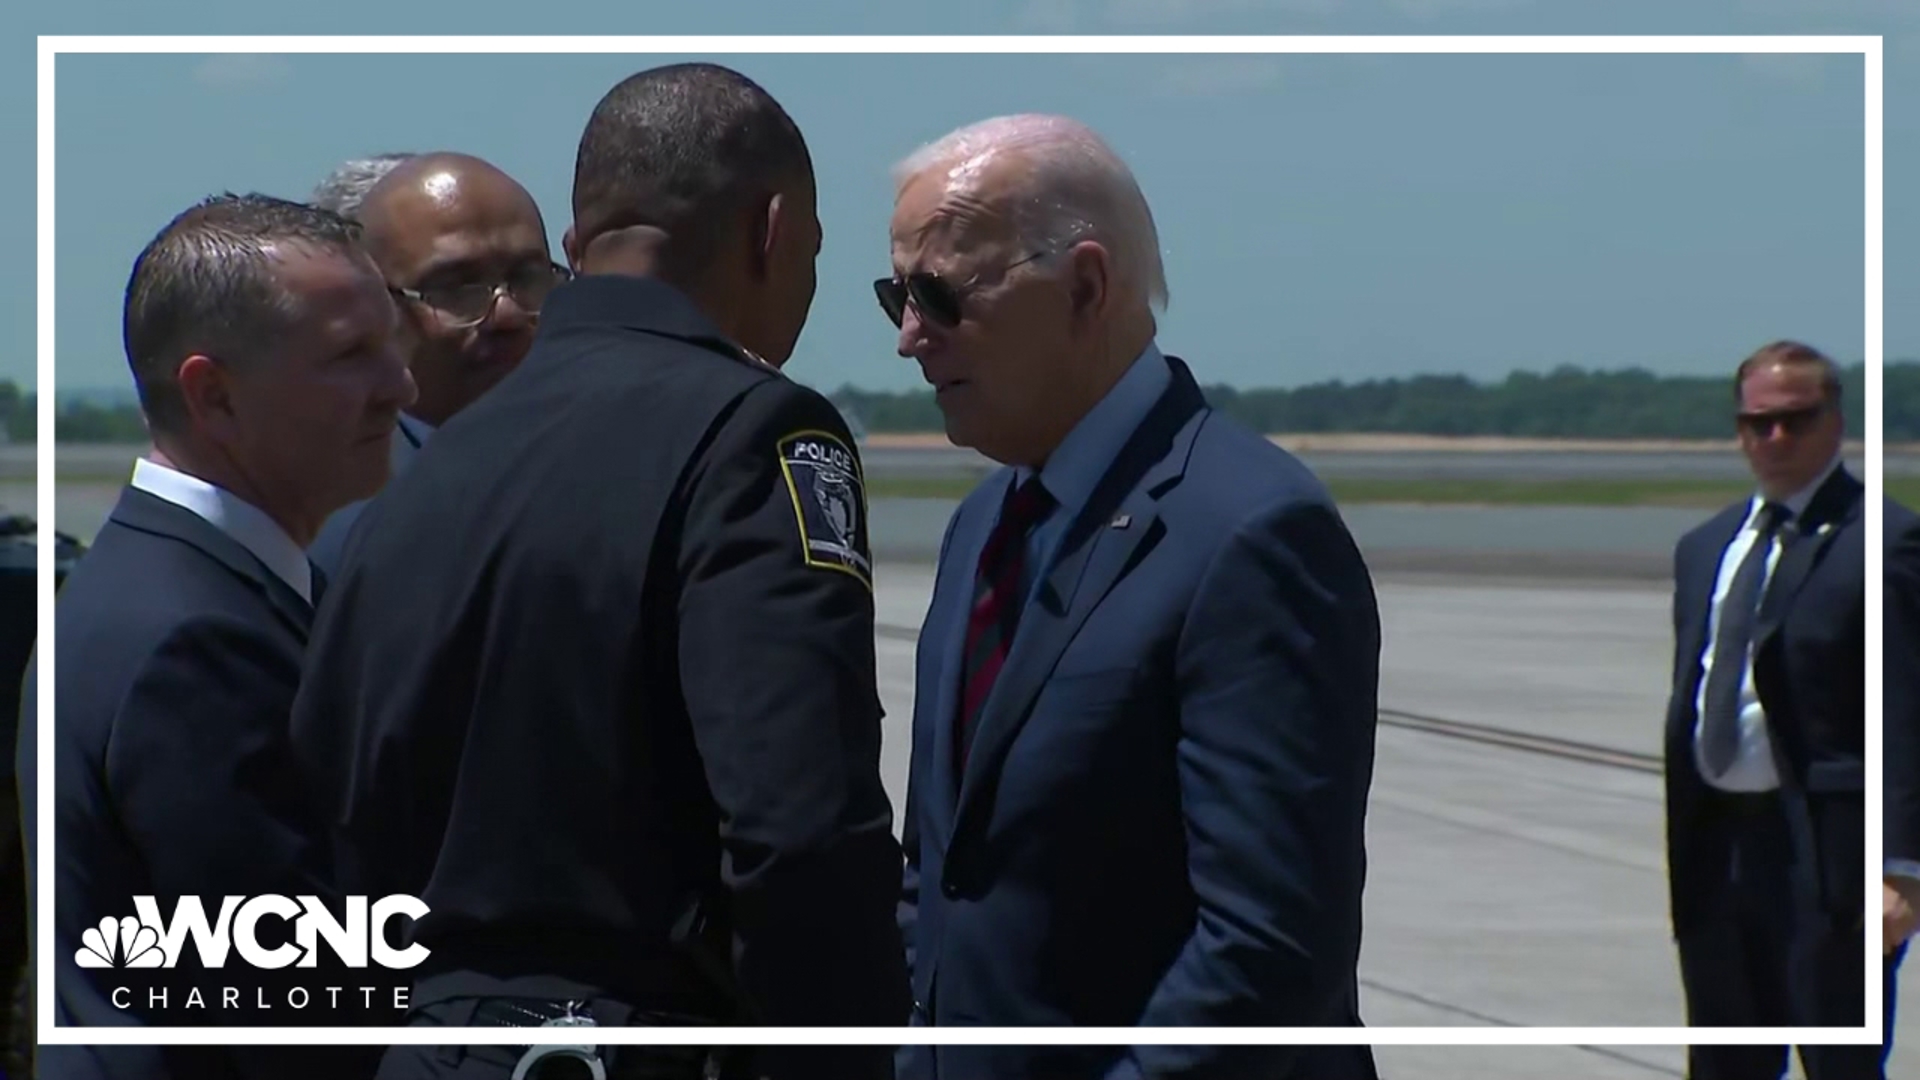 President Biden flew to Charlotte to offer comfort and support for the families of the fallen officers.